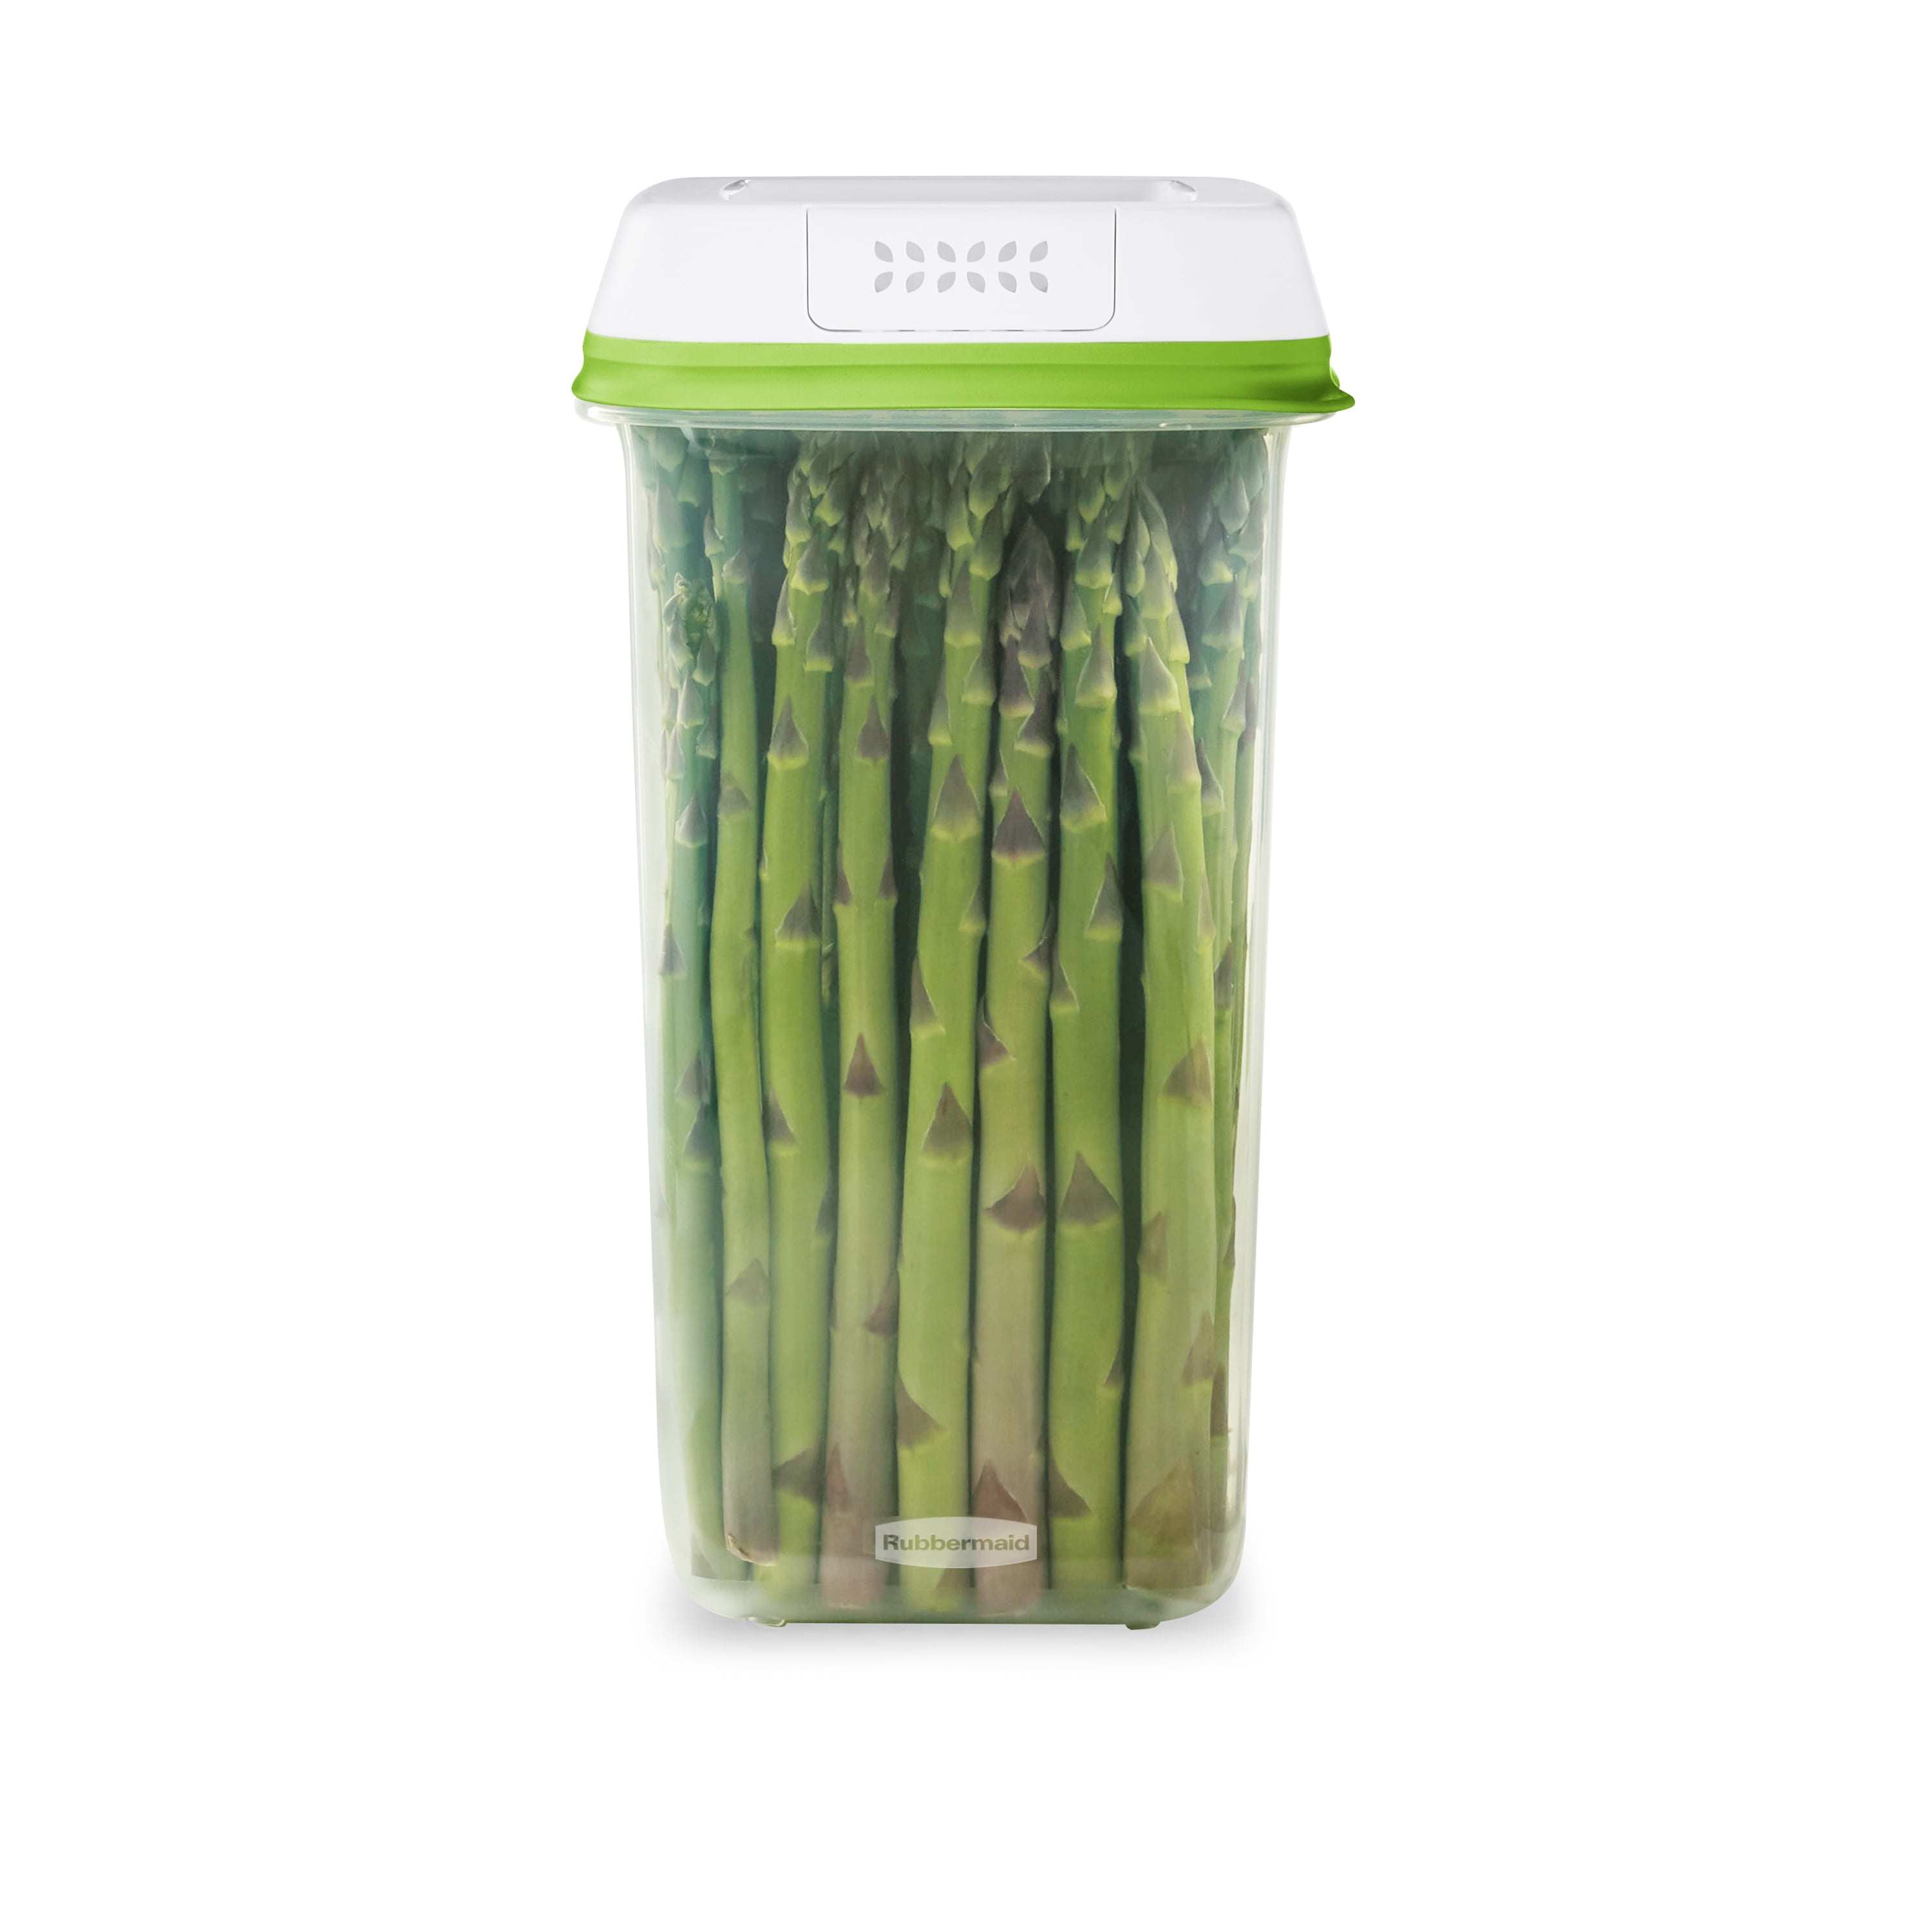 Rubbermaid FreshWorks Produce Saver 17.3 C. Clear Rectangle Food Storage  Container with Lid - Gillman Home Center